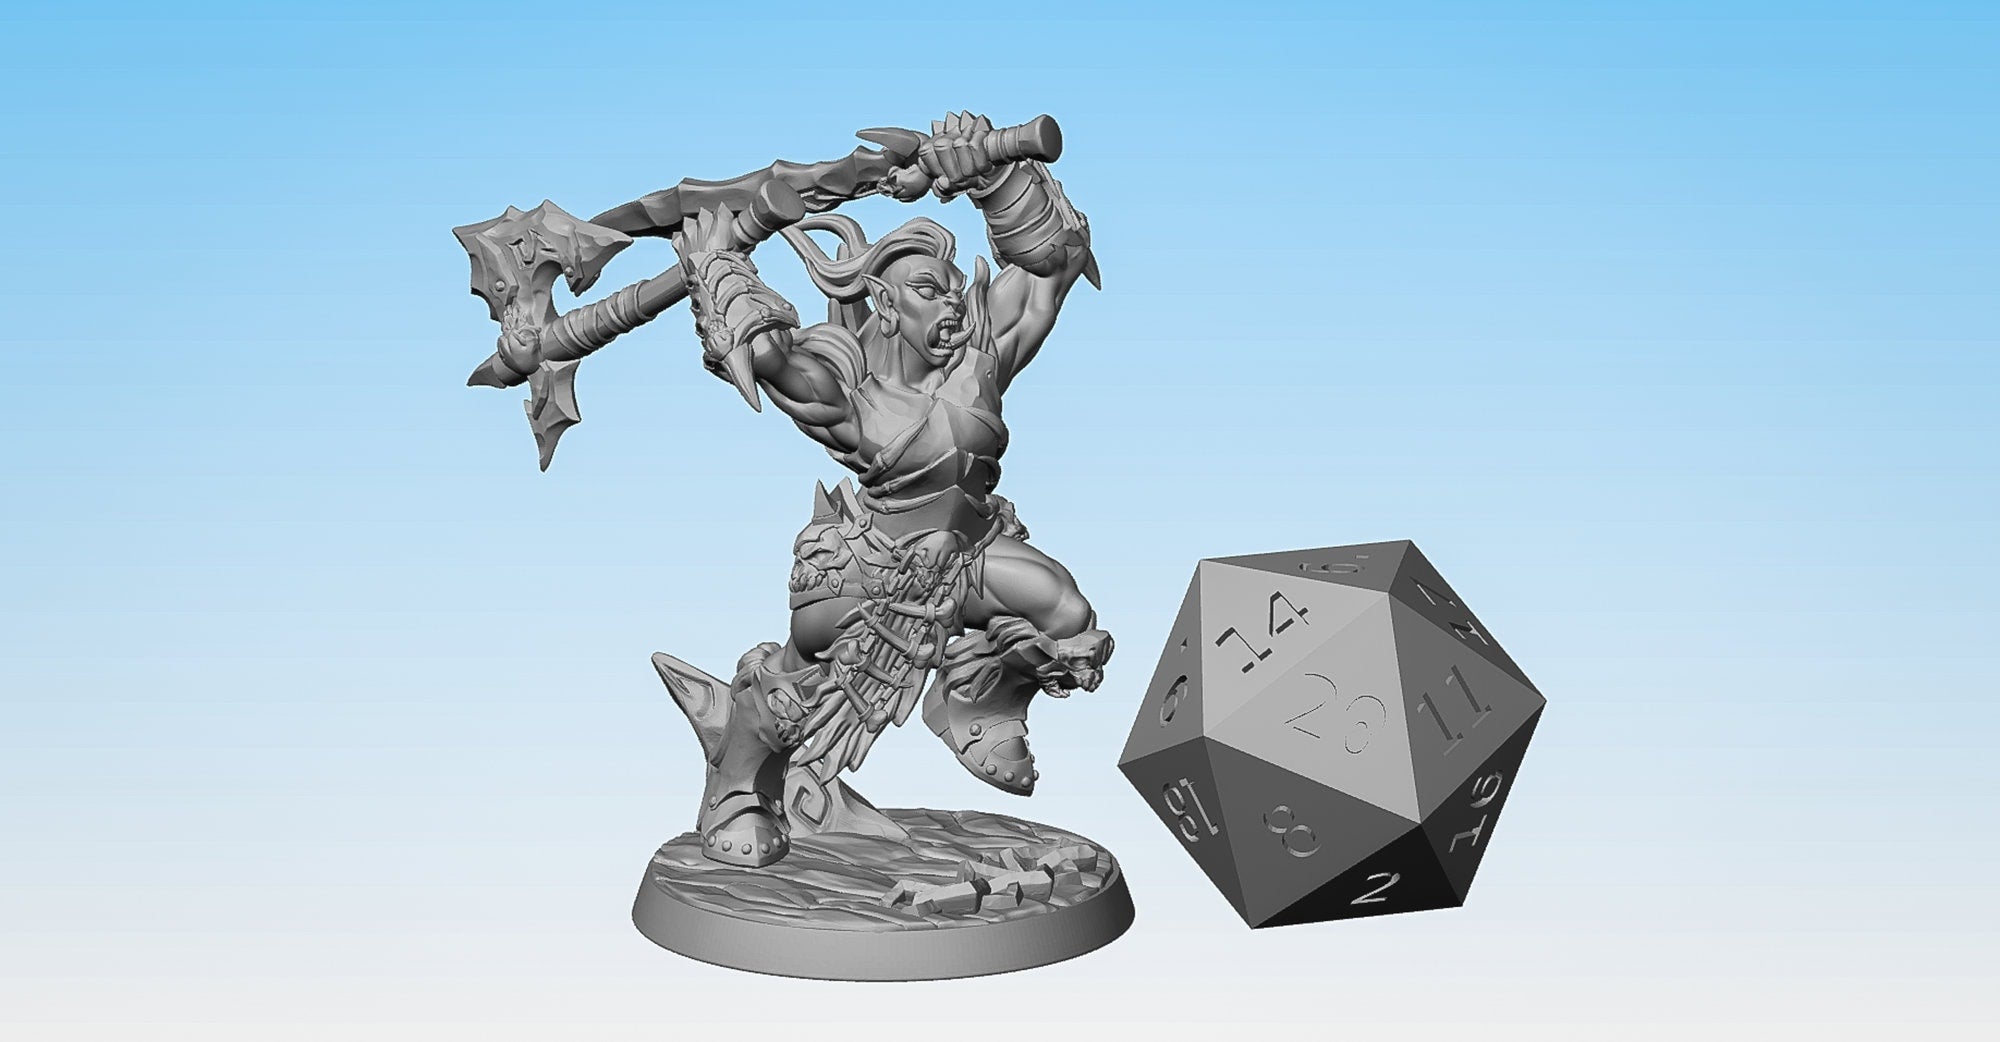 FROST ORC (f) "G" "Berserker Axe & Sword"-Role Playing Miniatures